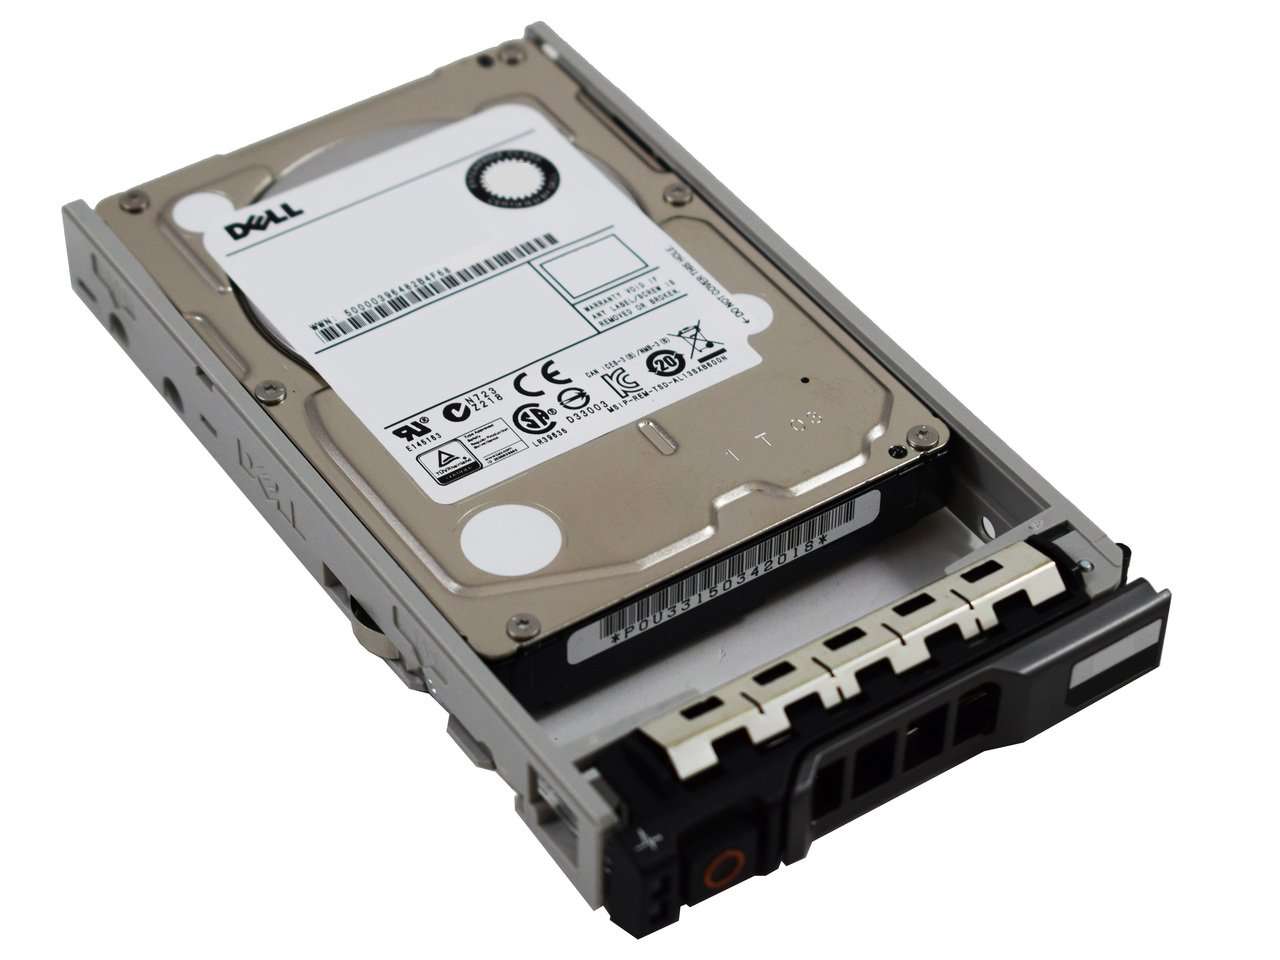 Dell G13 7T0DW 600GB 10K RPM SAS 6Gb/s 512n 2.5" Manufacturer Recertified HDD